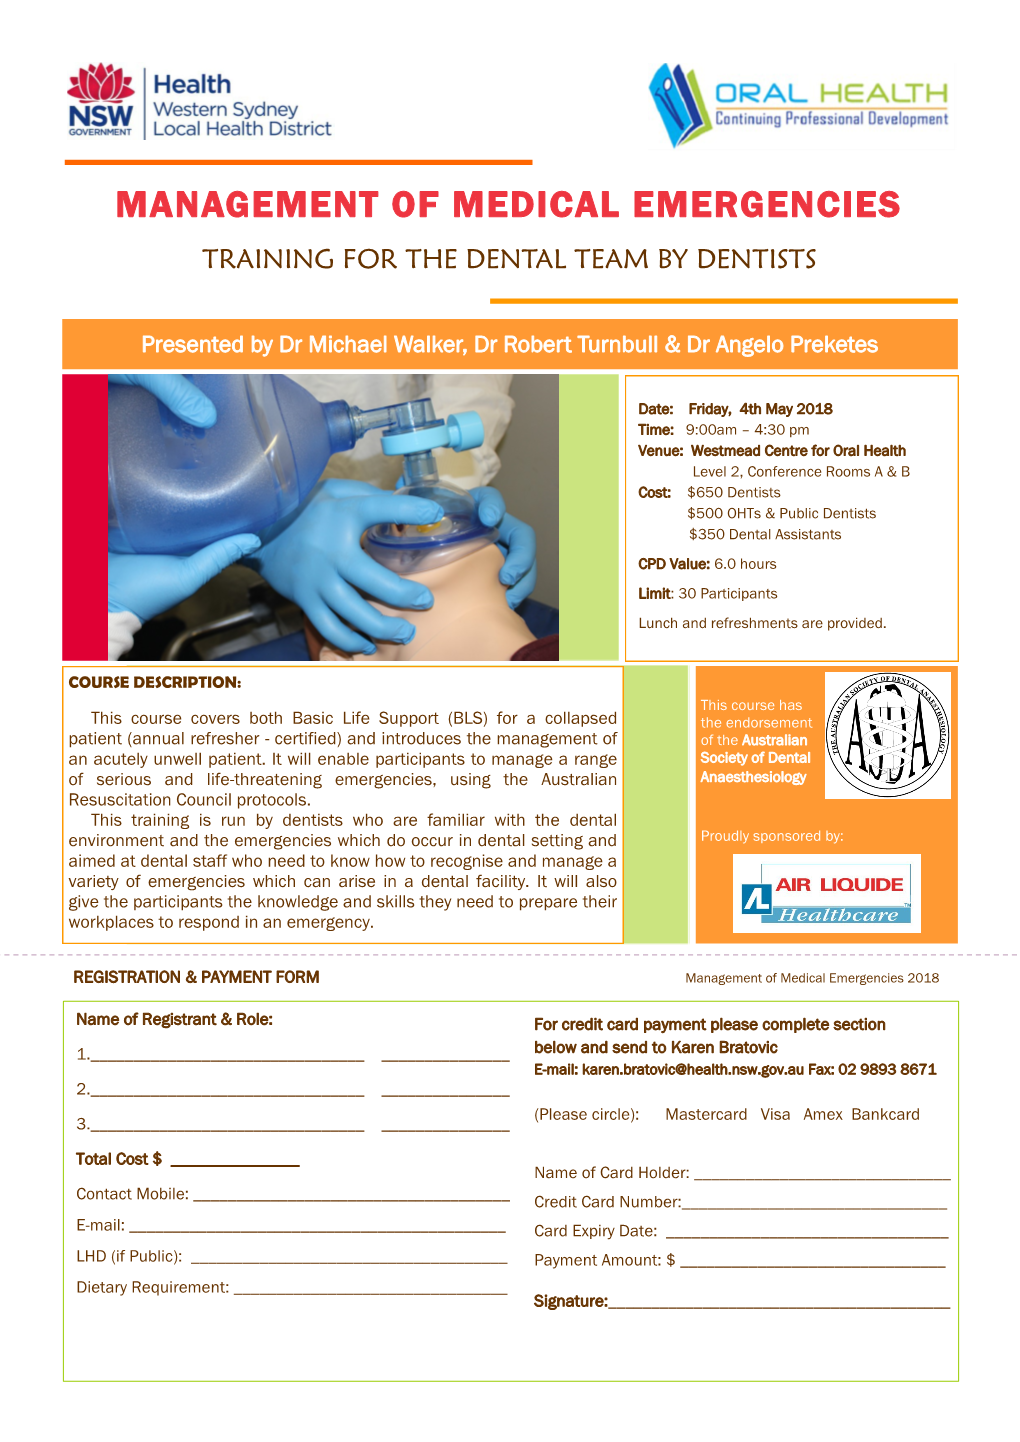 Management of Medical Emergencies Training for the Dental Team by Dentists